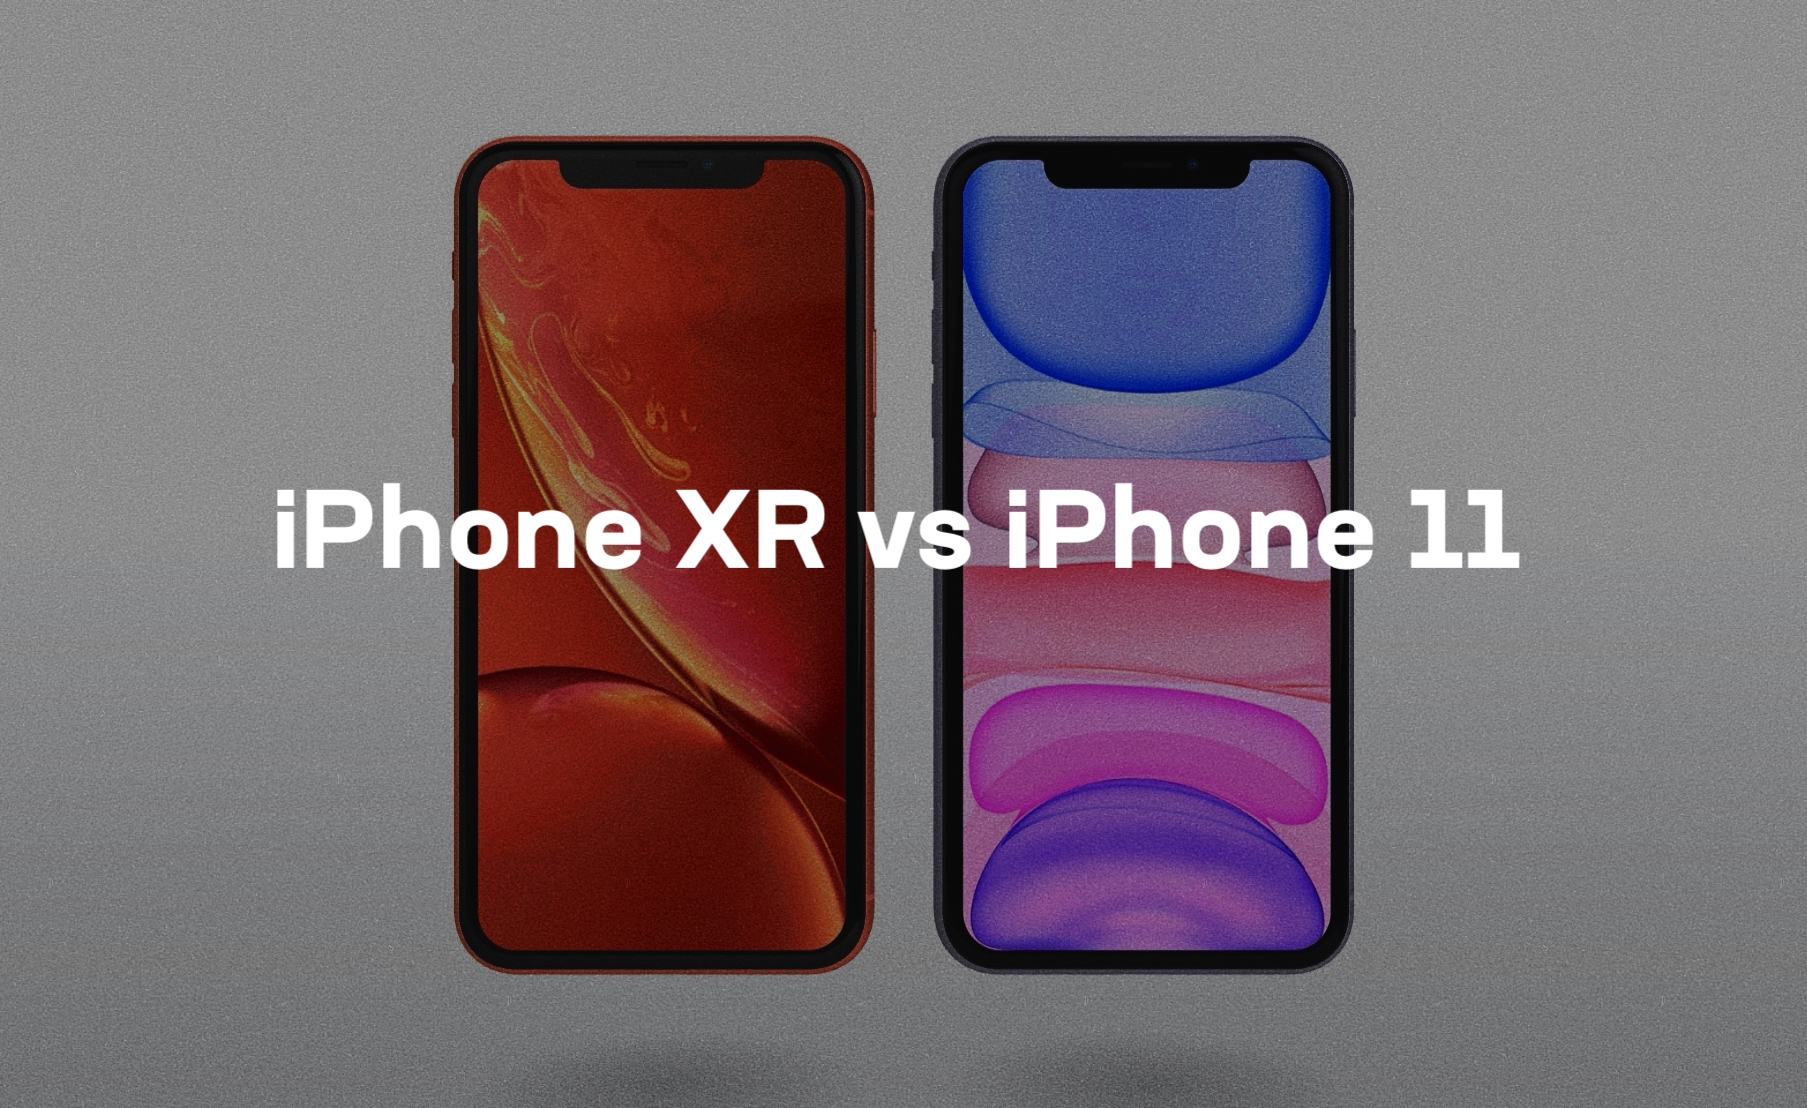 iPhone XR vs iPhone 11 – which is a better buy?